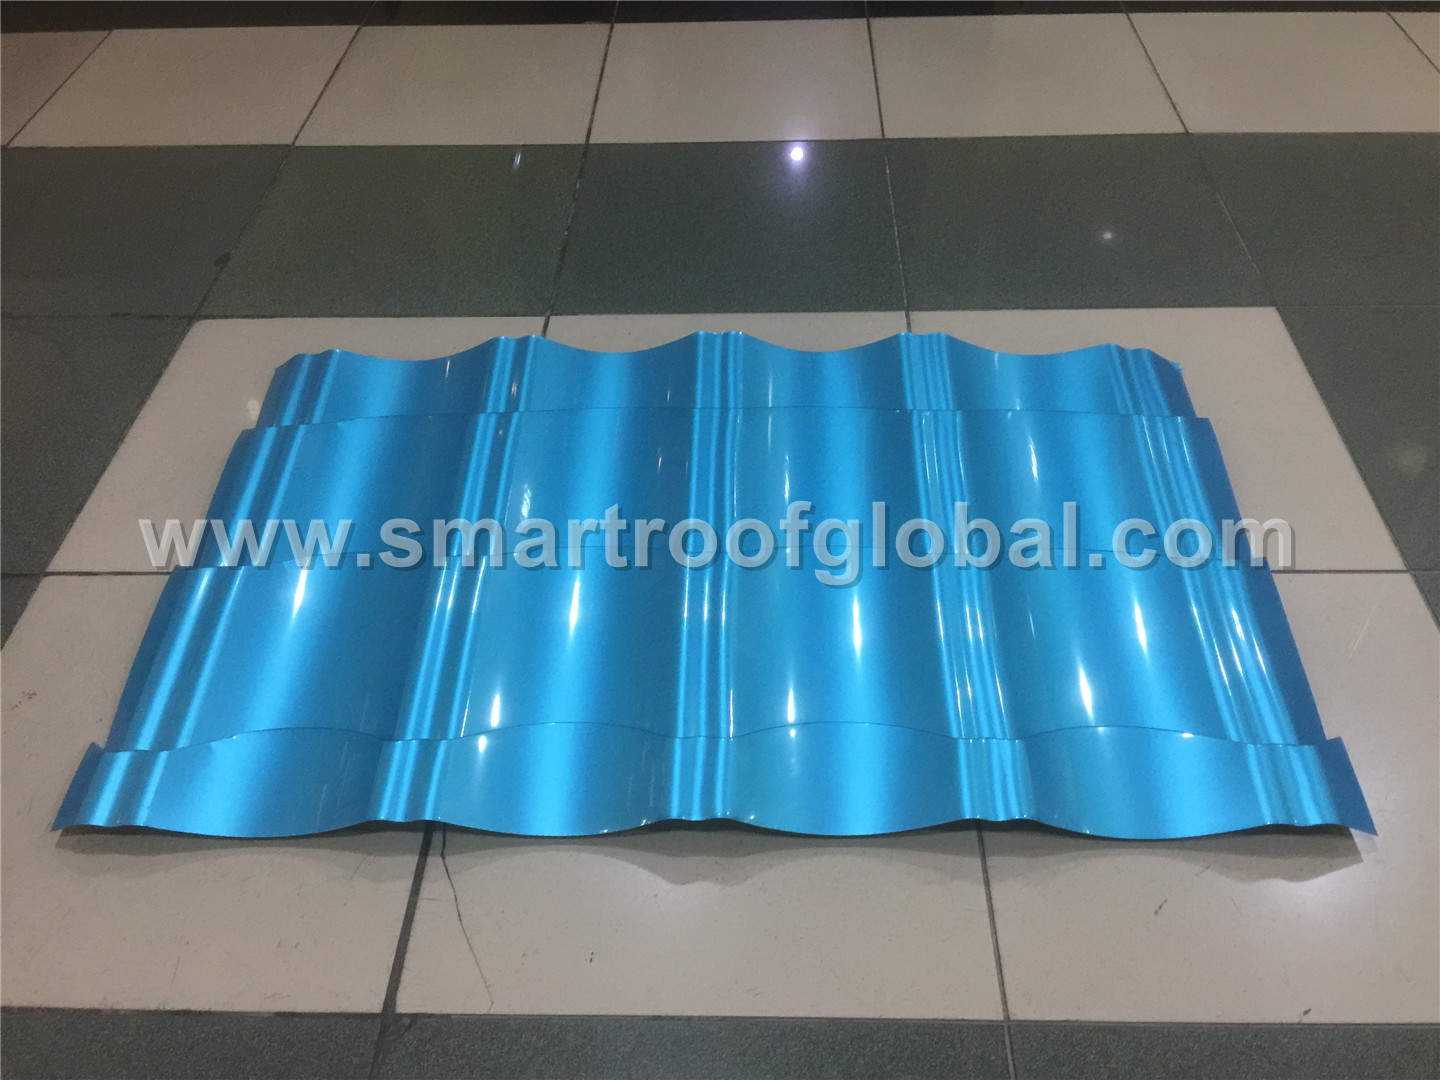 Manufacturer of Metal Roofing Cost Per Sheet - Wholesale Metal Roofing – Smartroof